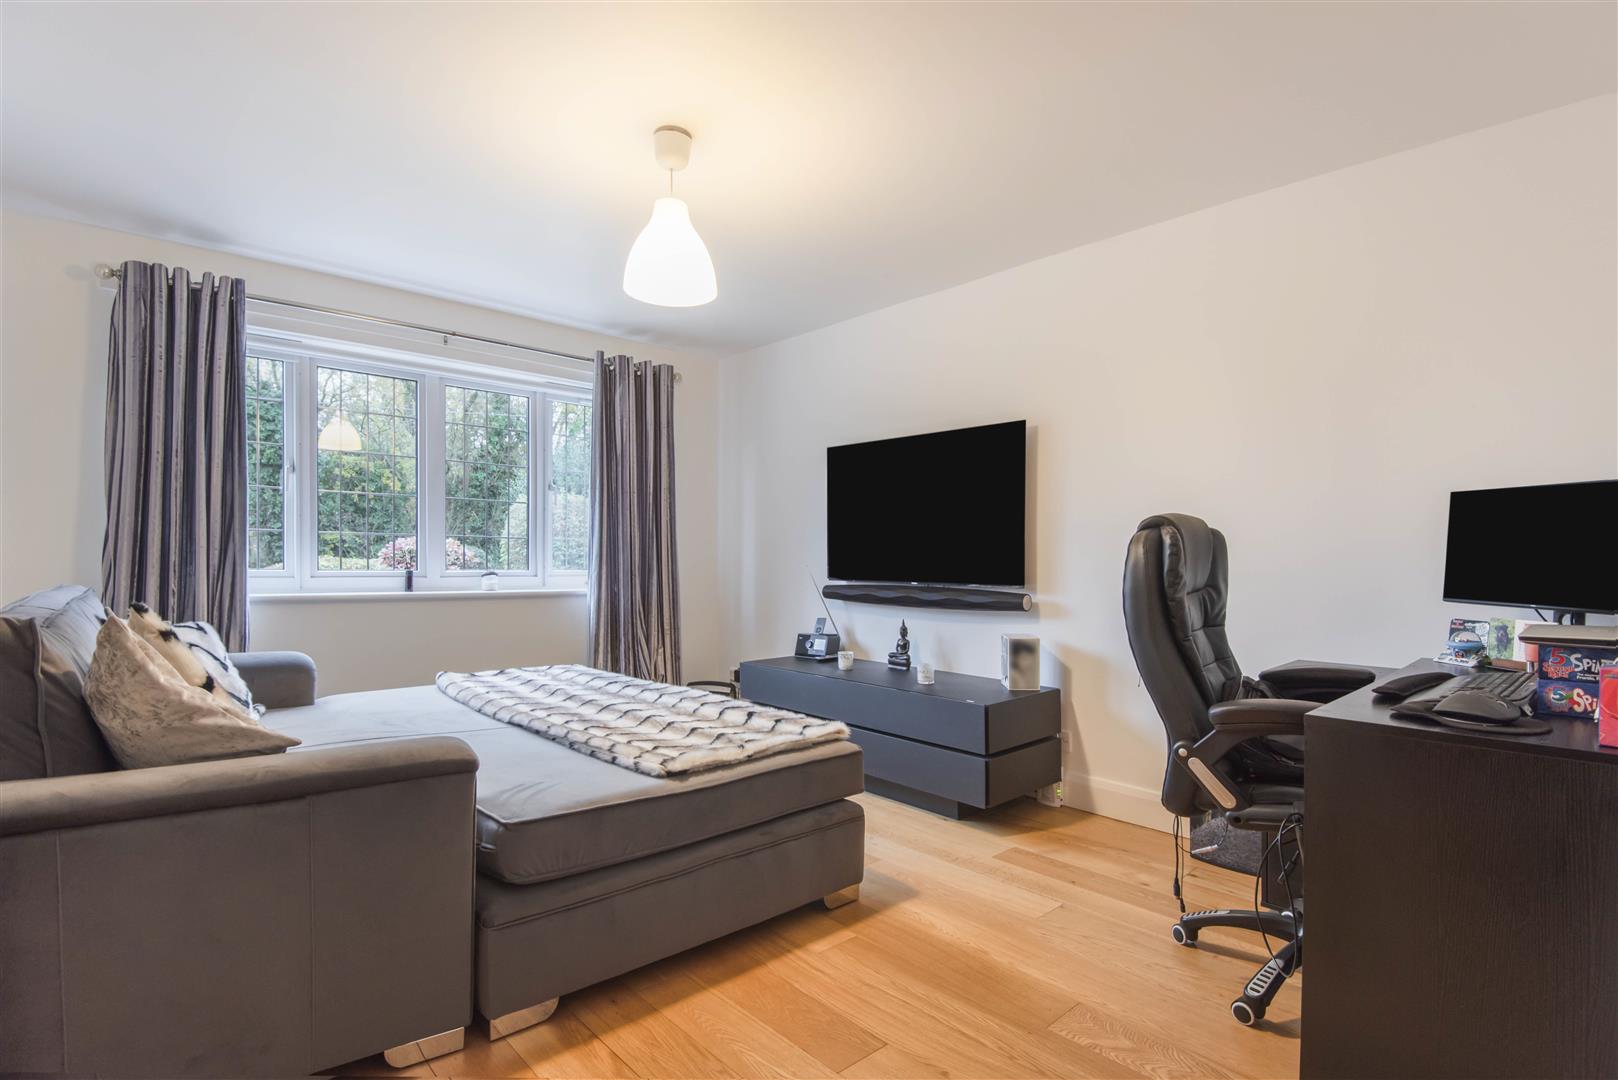 Horsepond Road Gallowstree Common house for sale in Reading